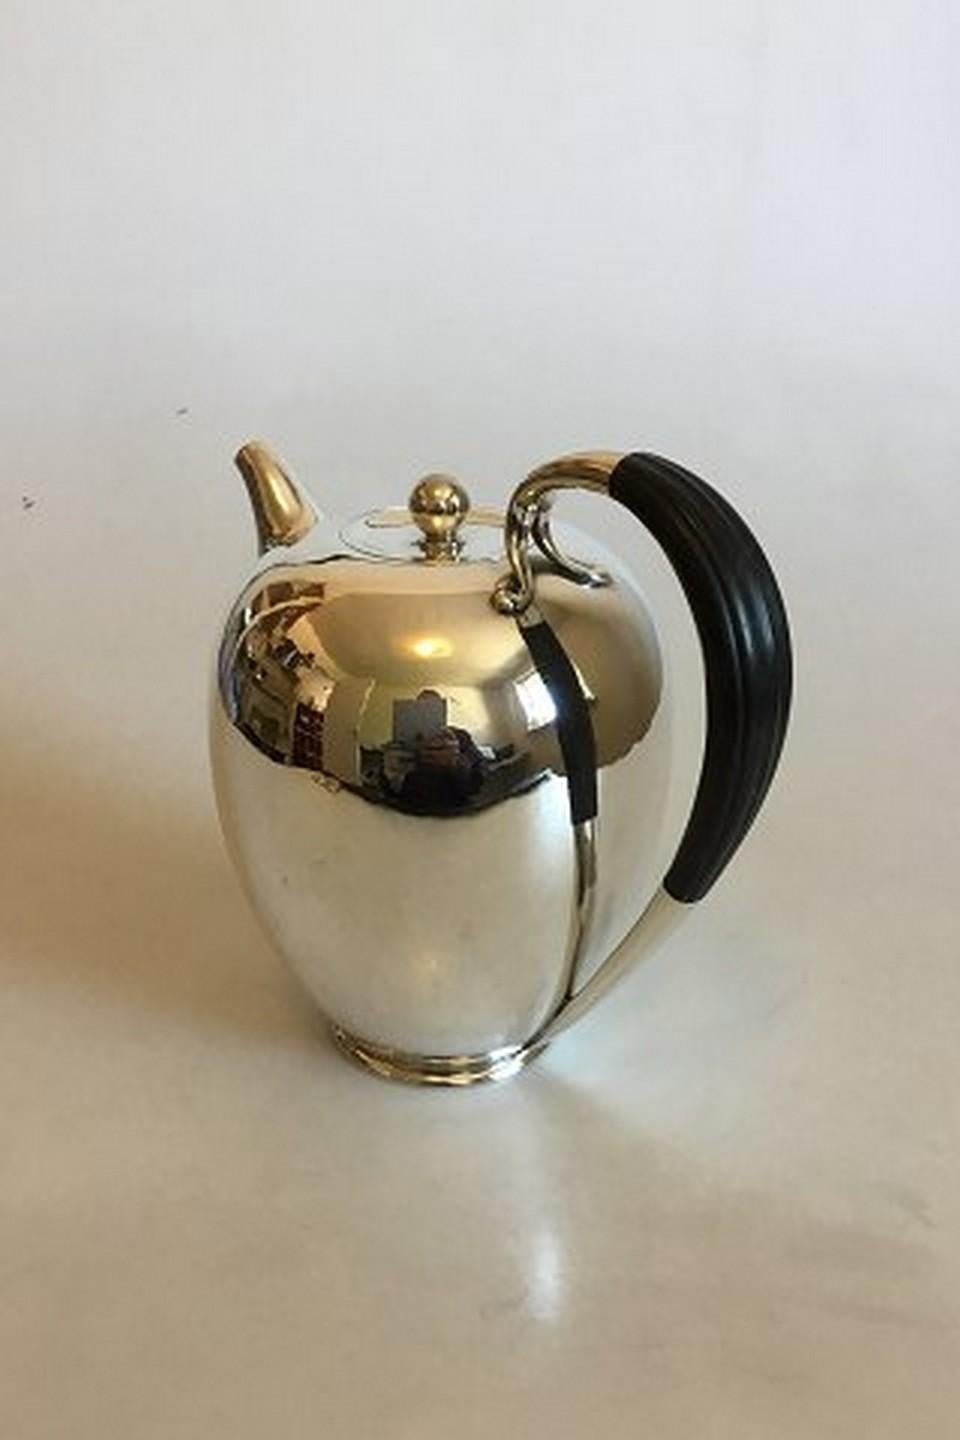 Georg Jensen sterling silver coffee pot no. 787 with handle og black wood.
Measures: 17 cm / 6 11/16 in. x 17 cm / 6 11/16 in.
Weighs 573 g / 20.25 oz.
Item no.: 336516.